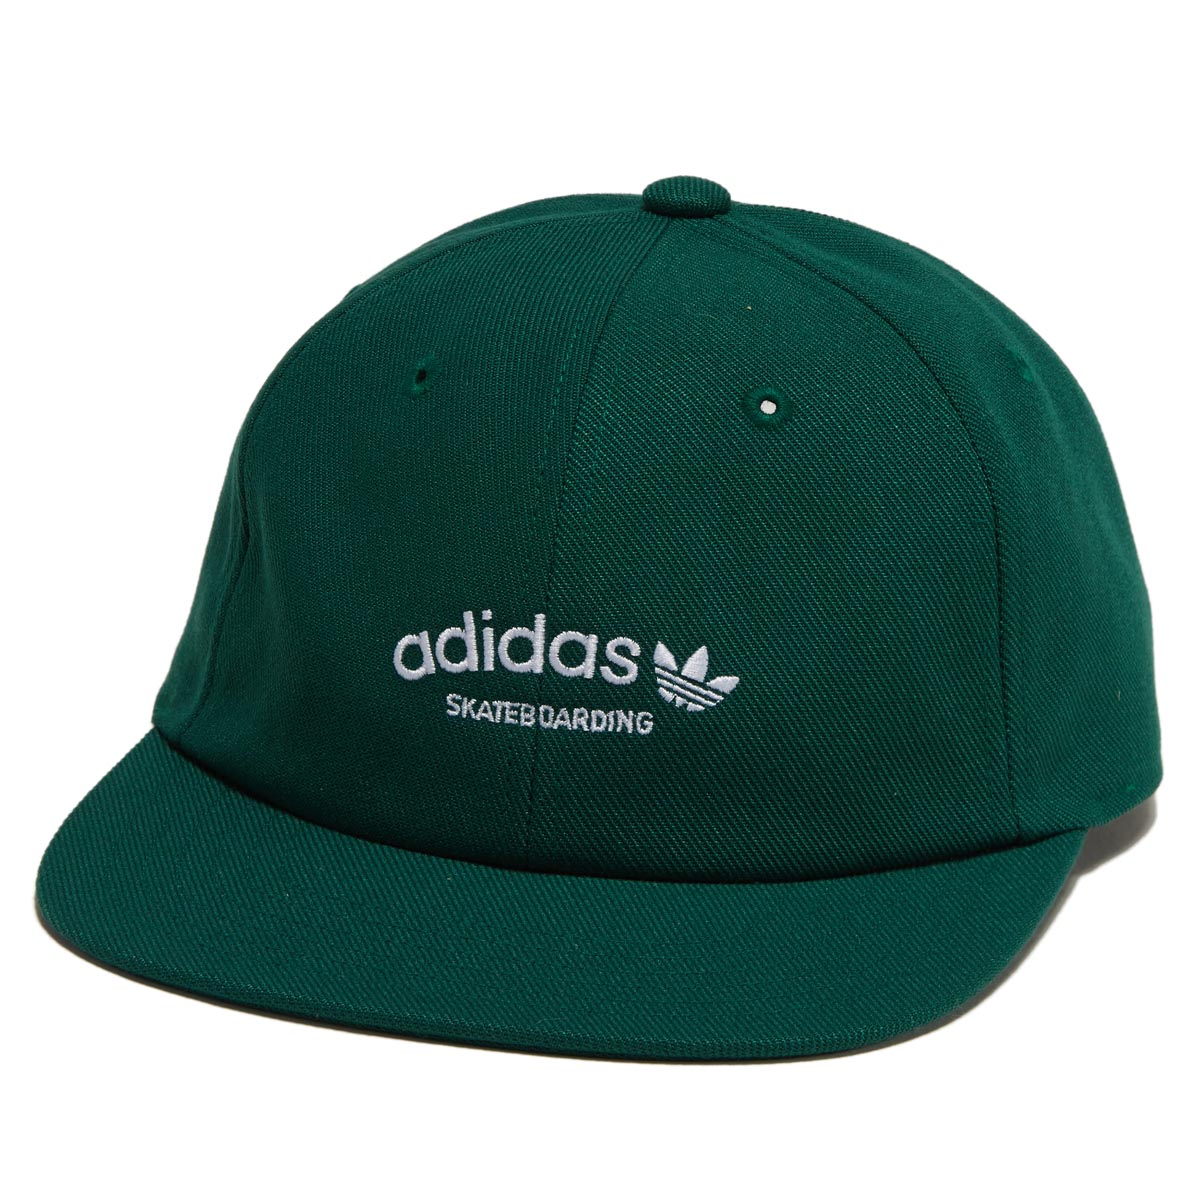 Adidas Arched Logo Hat - Core Green image 1